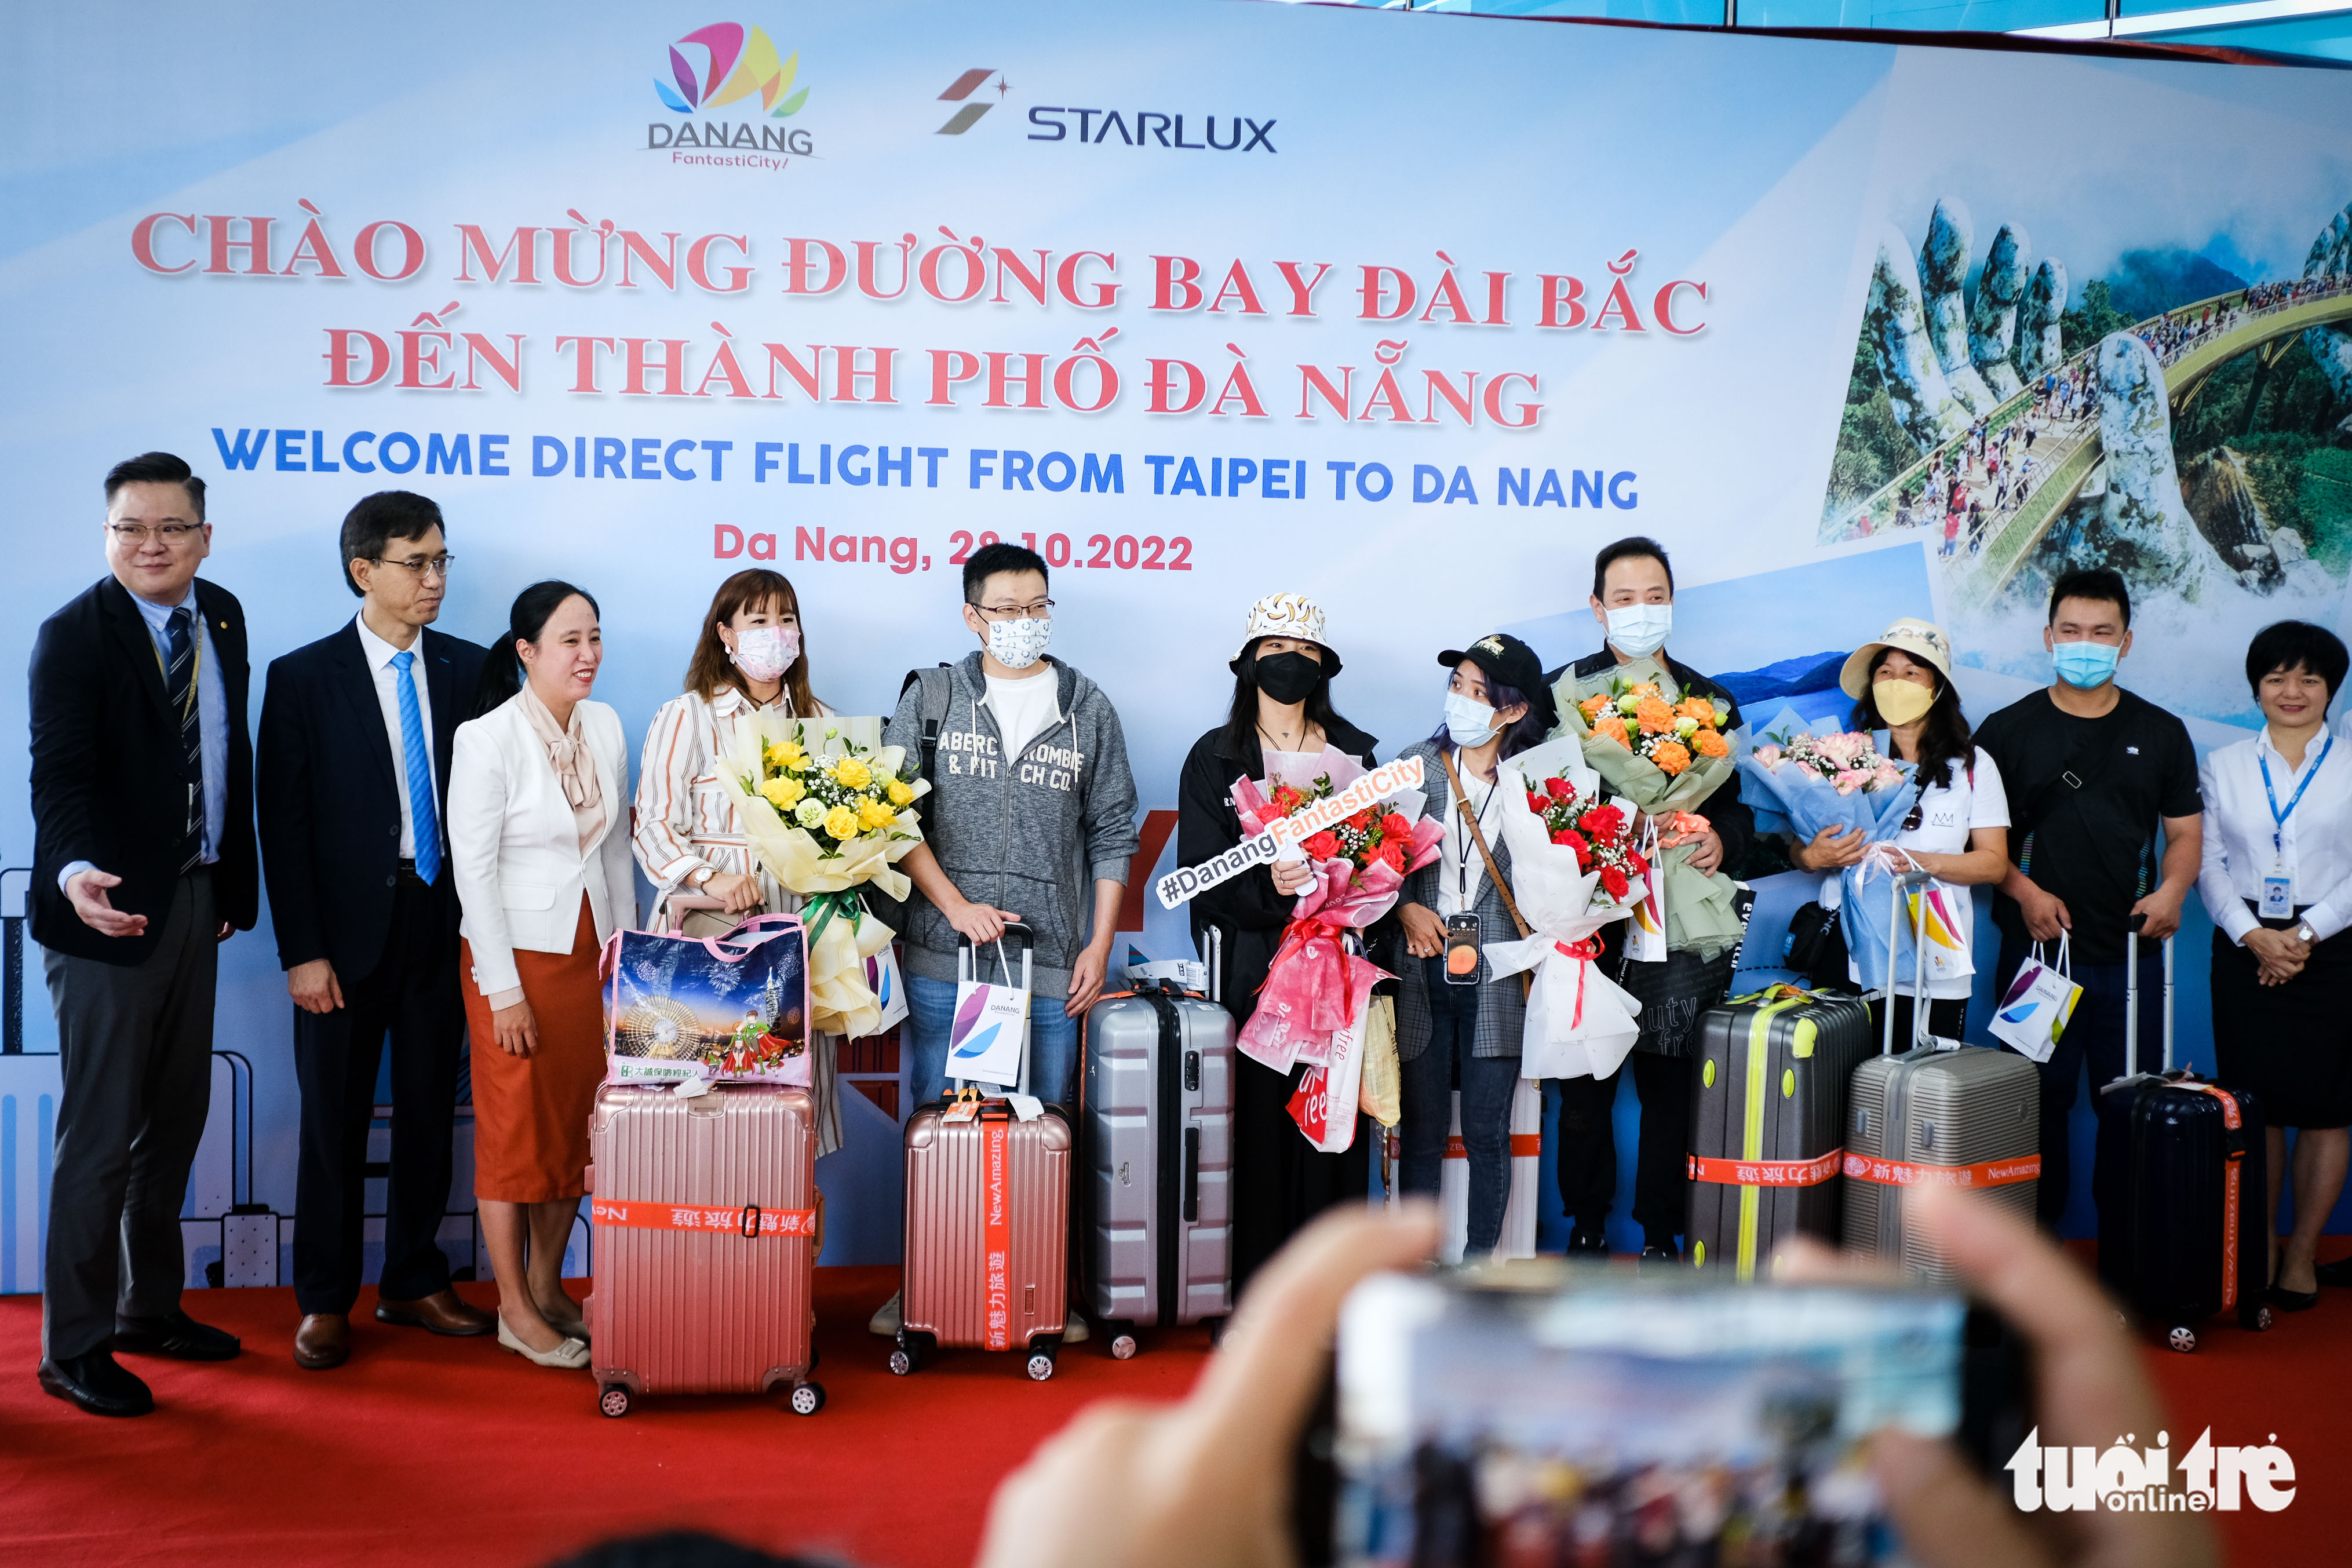 Tourists from Taiwan receive flowers and gifts following their arrival in Da Nang City, Vietnam, October 28, 2022. Photo: Tan Luc / Tuoi Tre